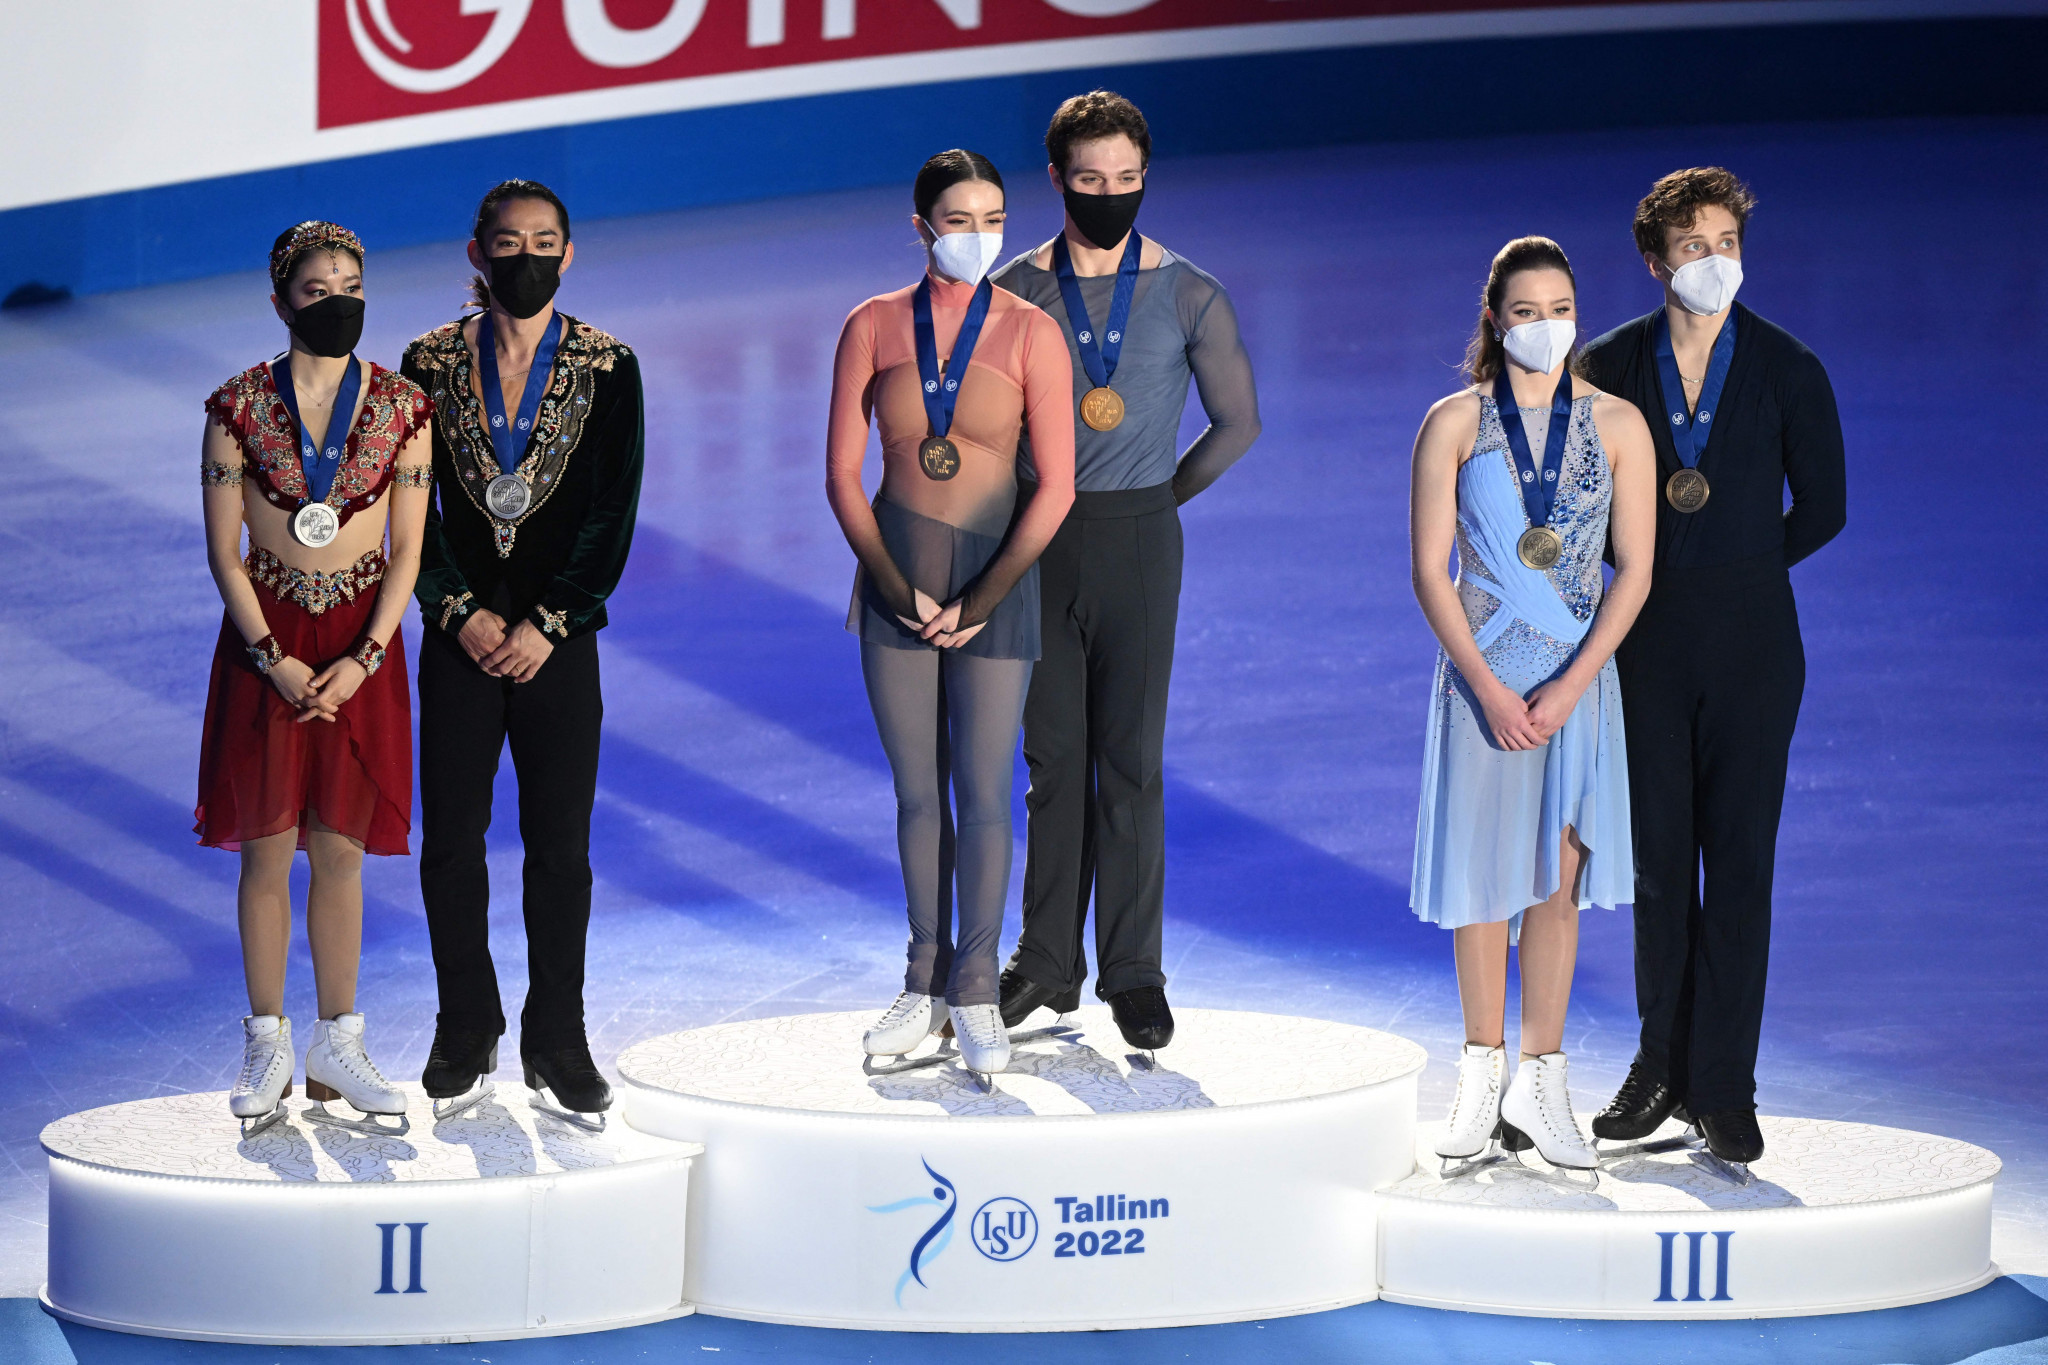 The podium for the ice dance free dance event at the ISU Four Continents Figure Skating Championships, with winners Caroline Green and Michael Parsons, pictured centre ©Getty Images